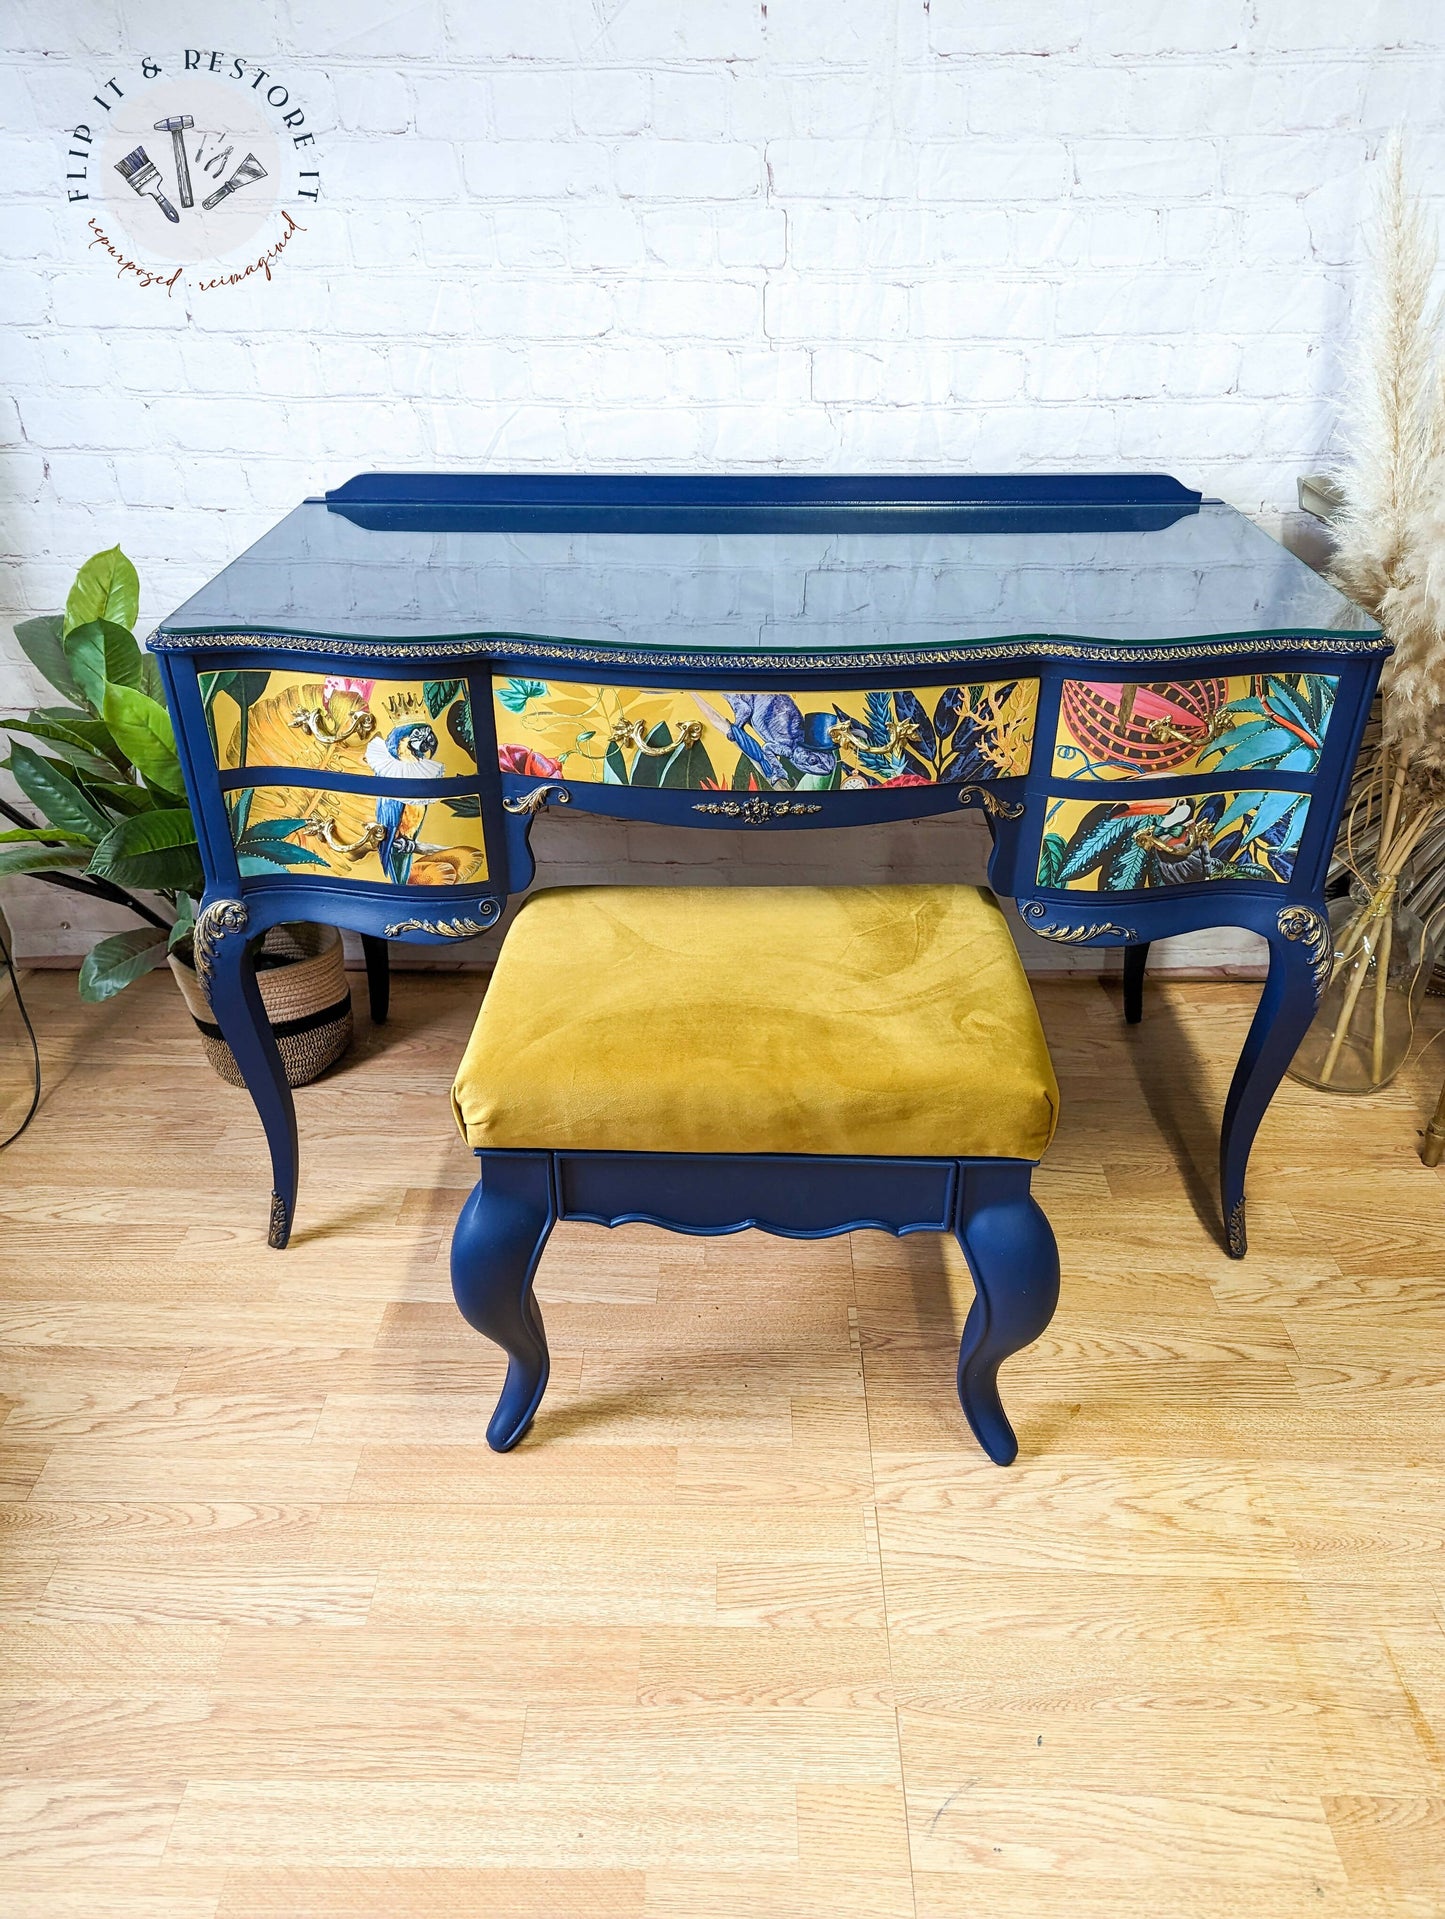 Vintage French Style Painted Bedroom Set - Dressing Table, Vanity, Desk, Sideboard and Stool, Statement, Maximalist MADE TO ORDER